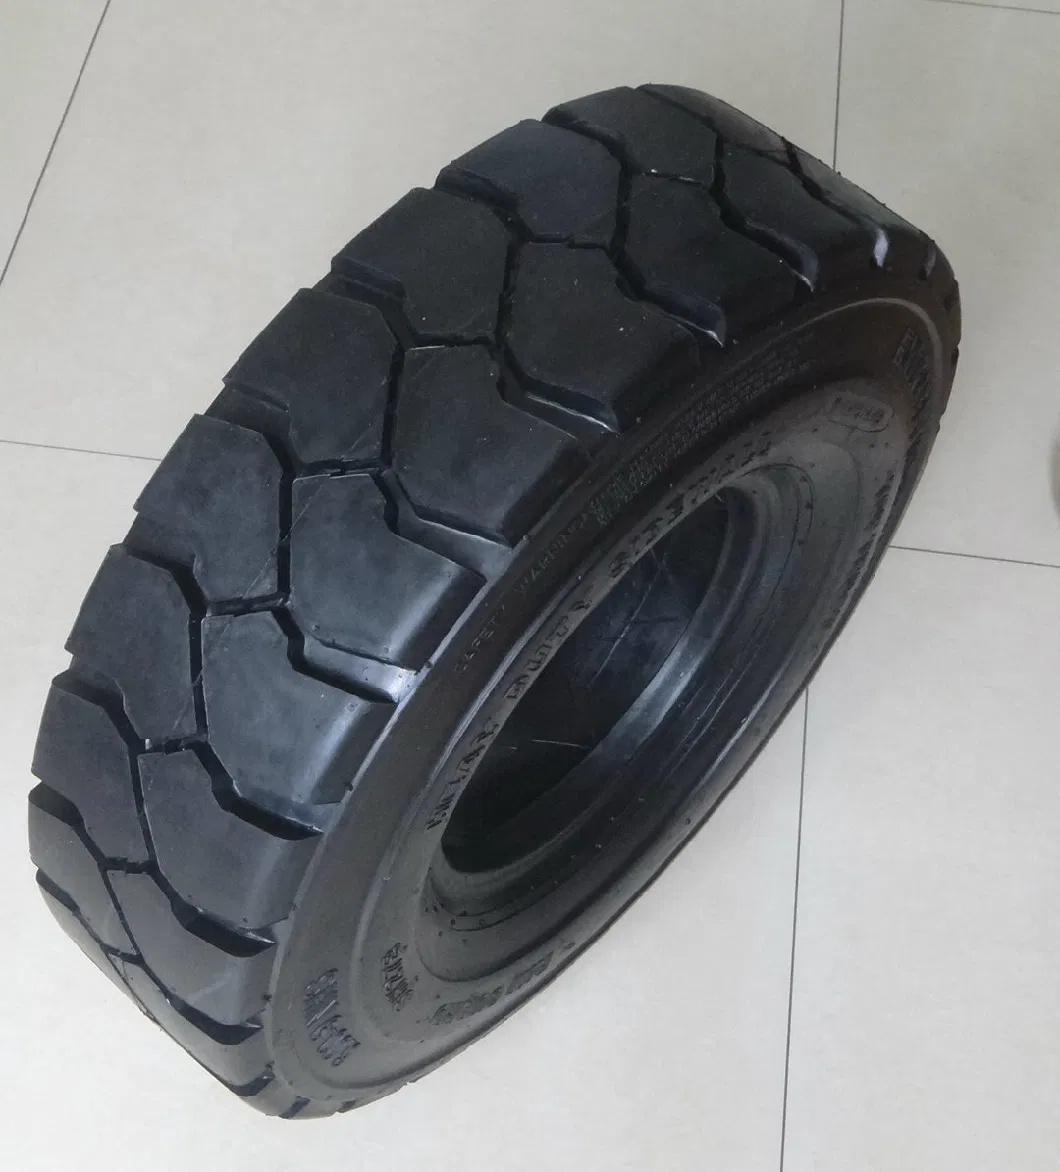 Competitive China Wholesale Factory Price Forklift Tyre 7.00-9, 7.00-12